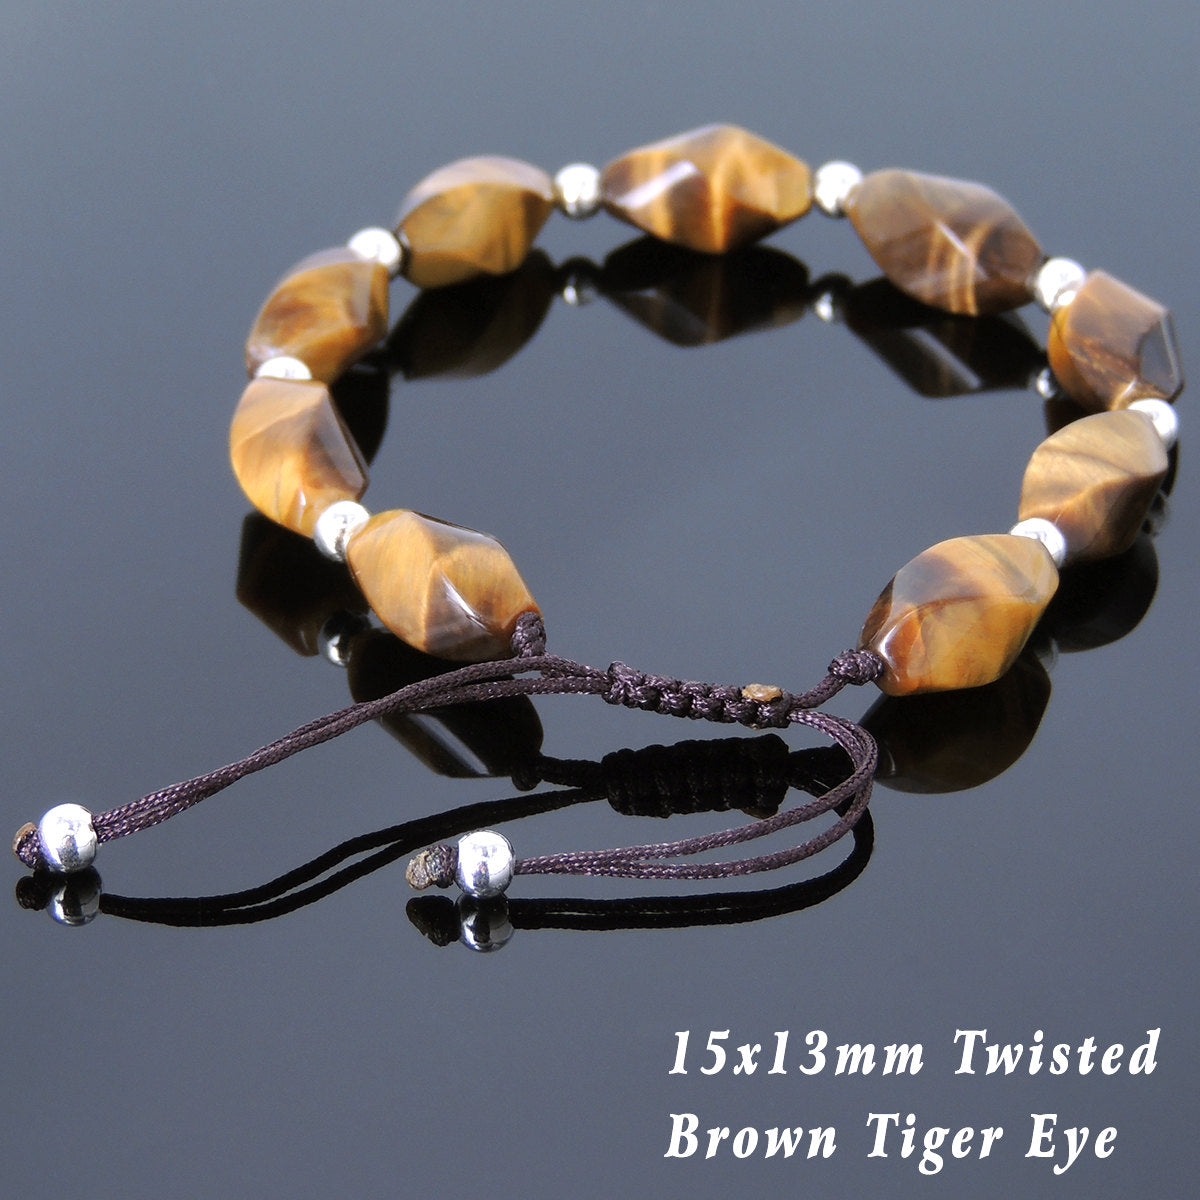 9x15mm Twisted Brown Tiger Eye Adjustable Braided Healing Gemstone Bracelet with S925 Sterling Silver Spacer beads - Handmade by Gem & Silver BR781